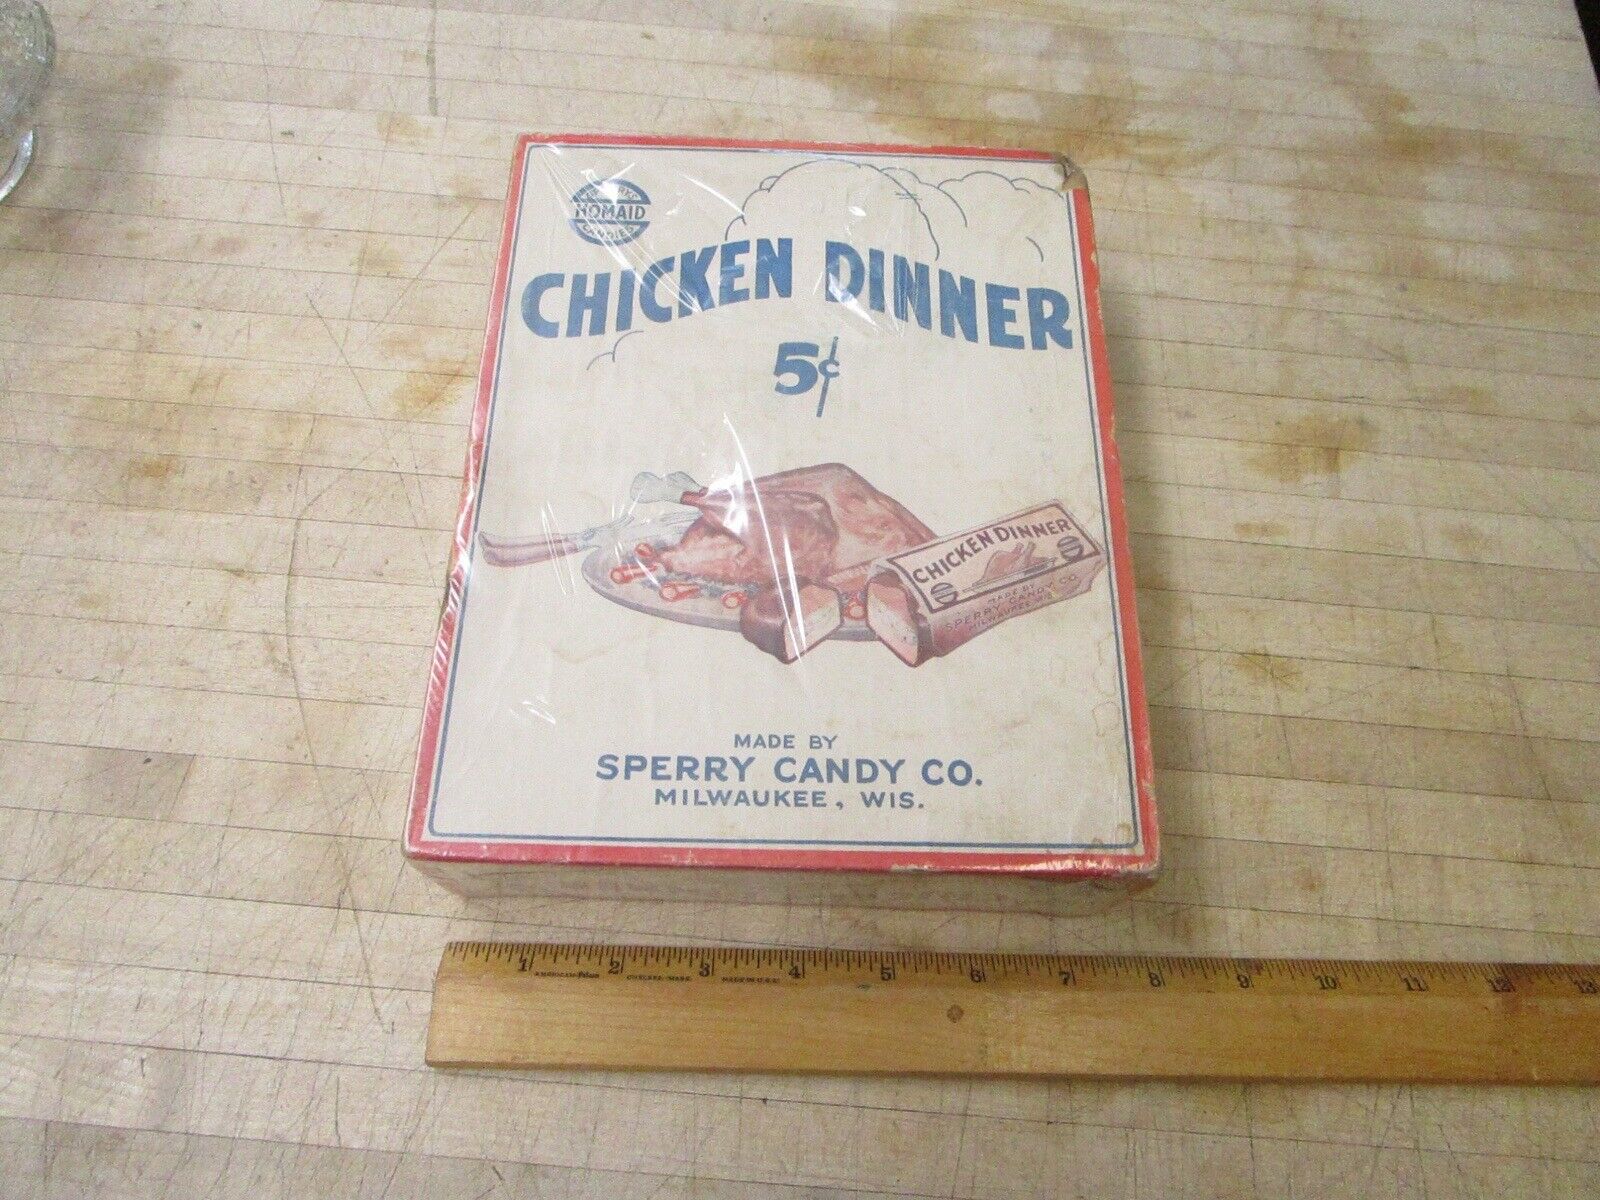 Chicken Dinner Candy 5c Original  Counter Display Box Sperry Co.